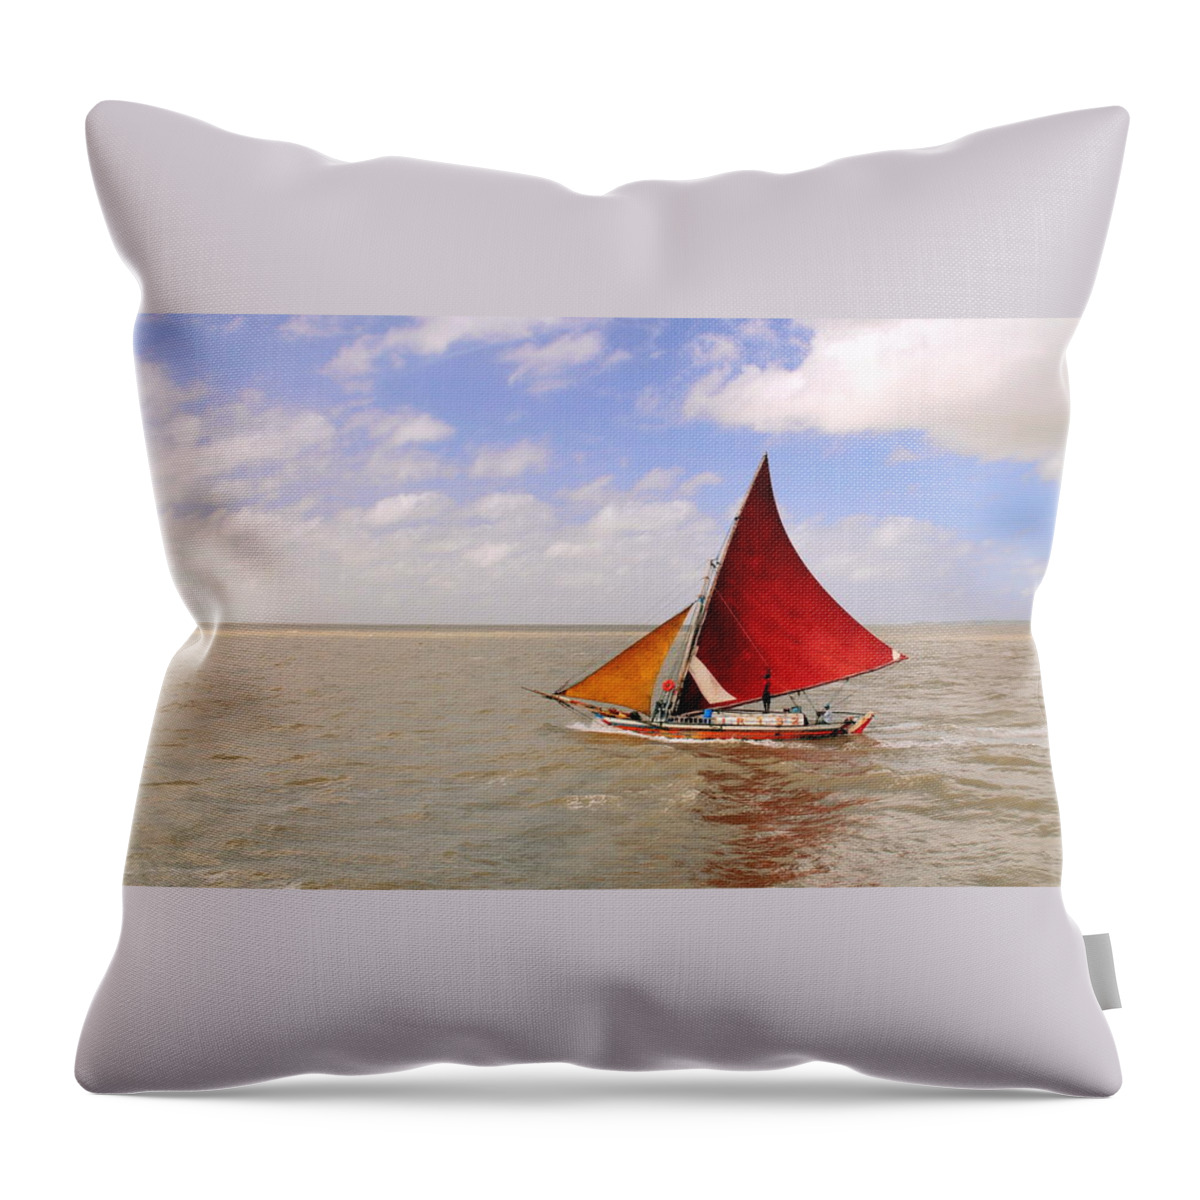 Sailboat Throw Pillow featuring the photograph Sailboat On Water by Douglas Baker